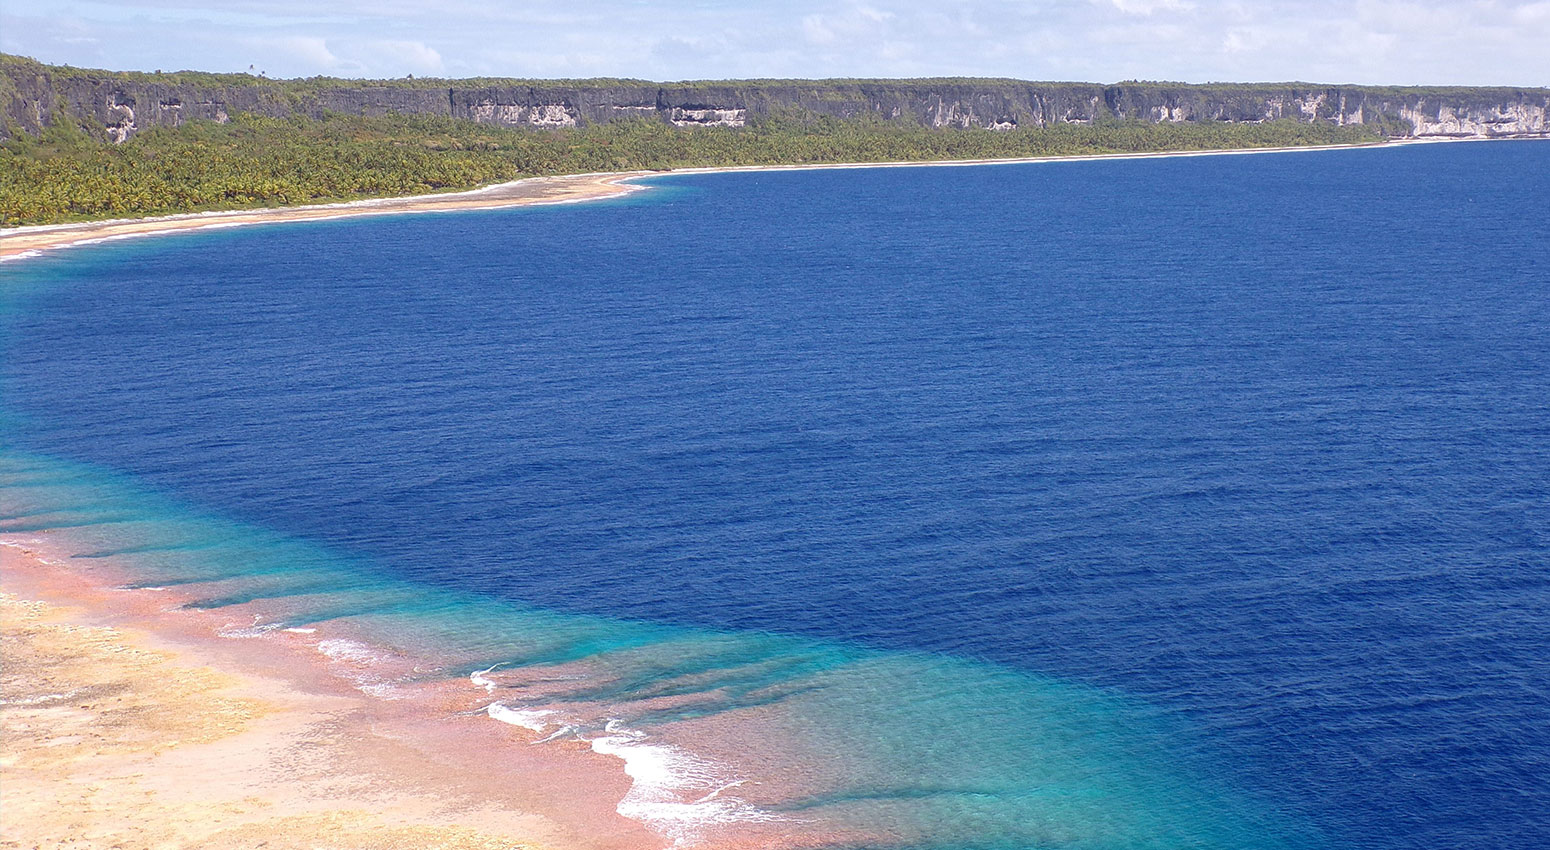 A beach and the deep blue see with green hills in the background.